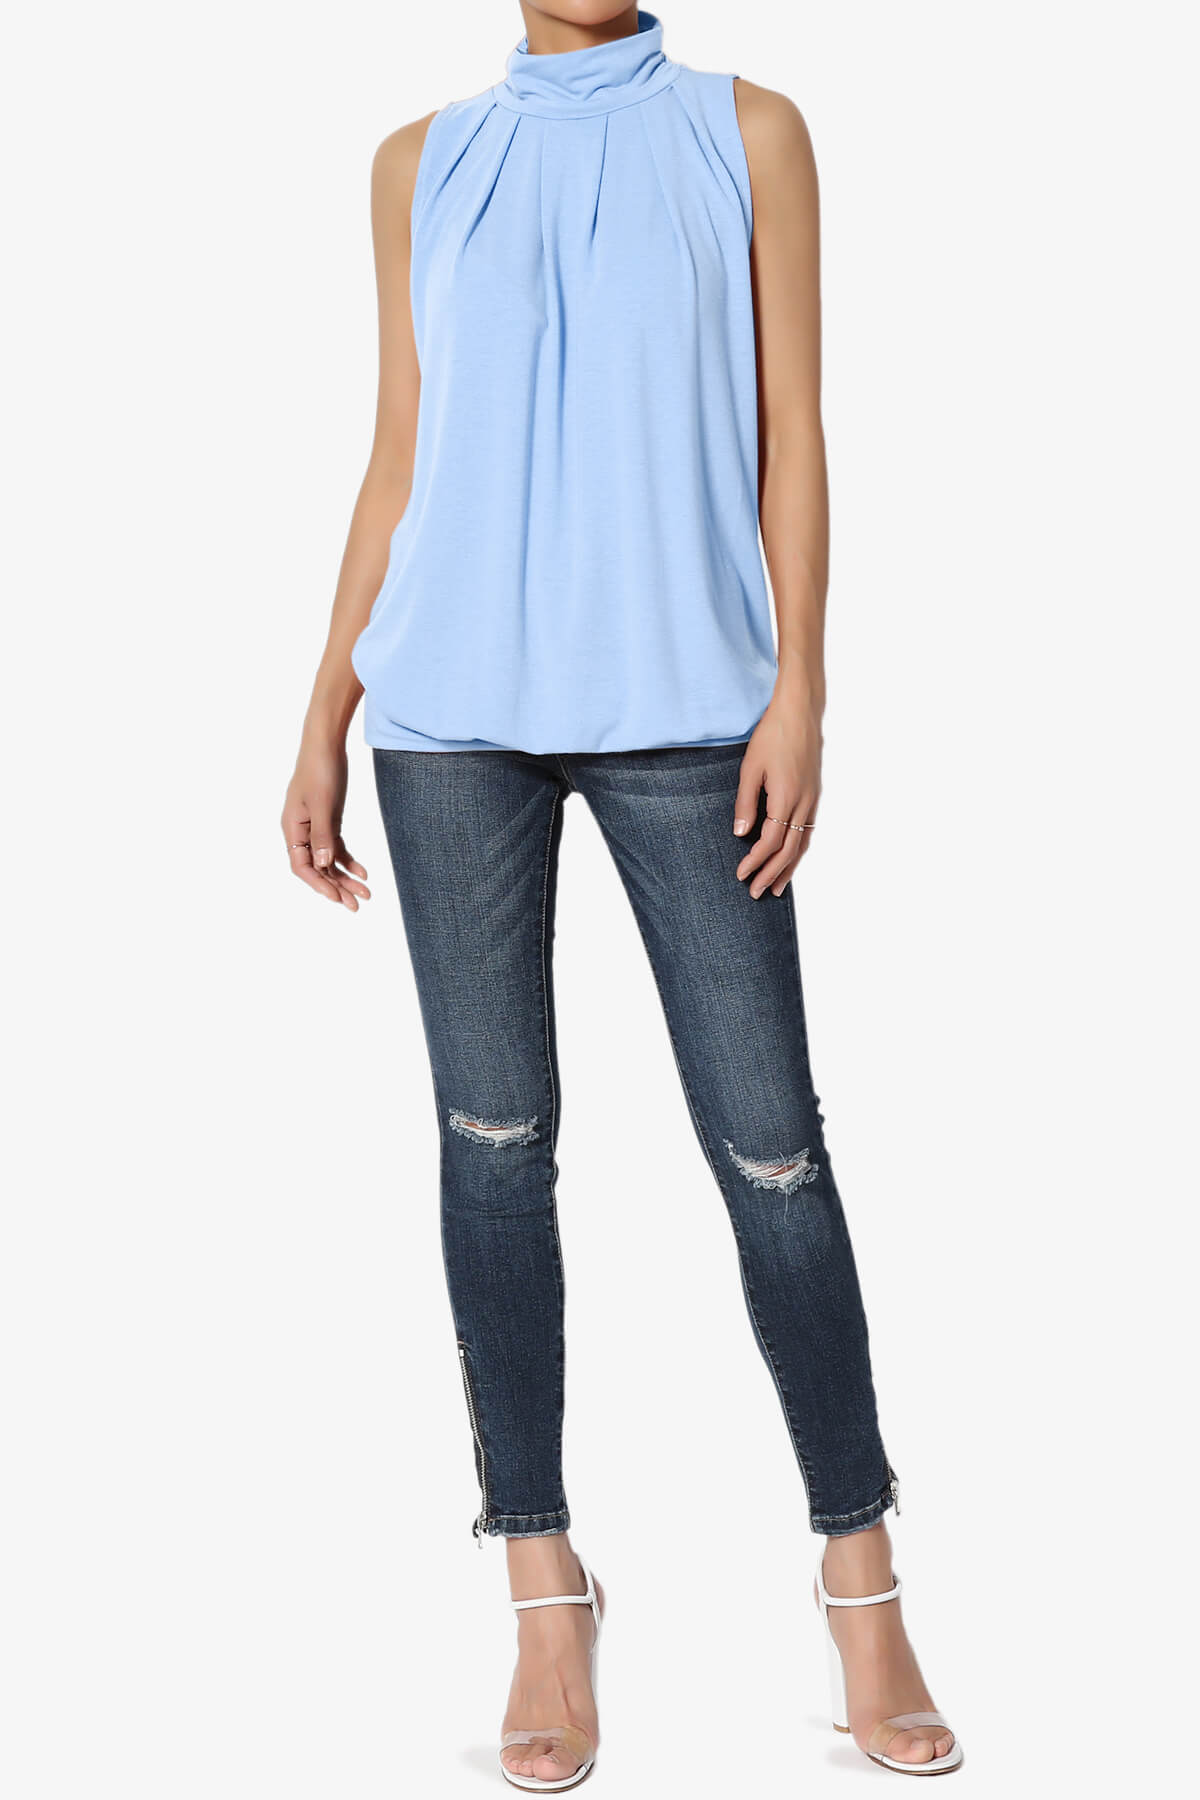 Load image into Gallery viewer, Jibbitz Sleeveless Mock Neck Pleated Top LIGHT BLUE_6
